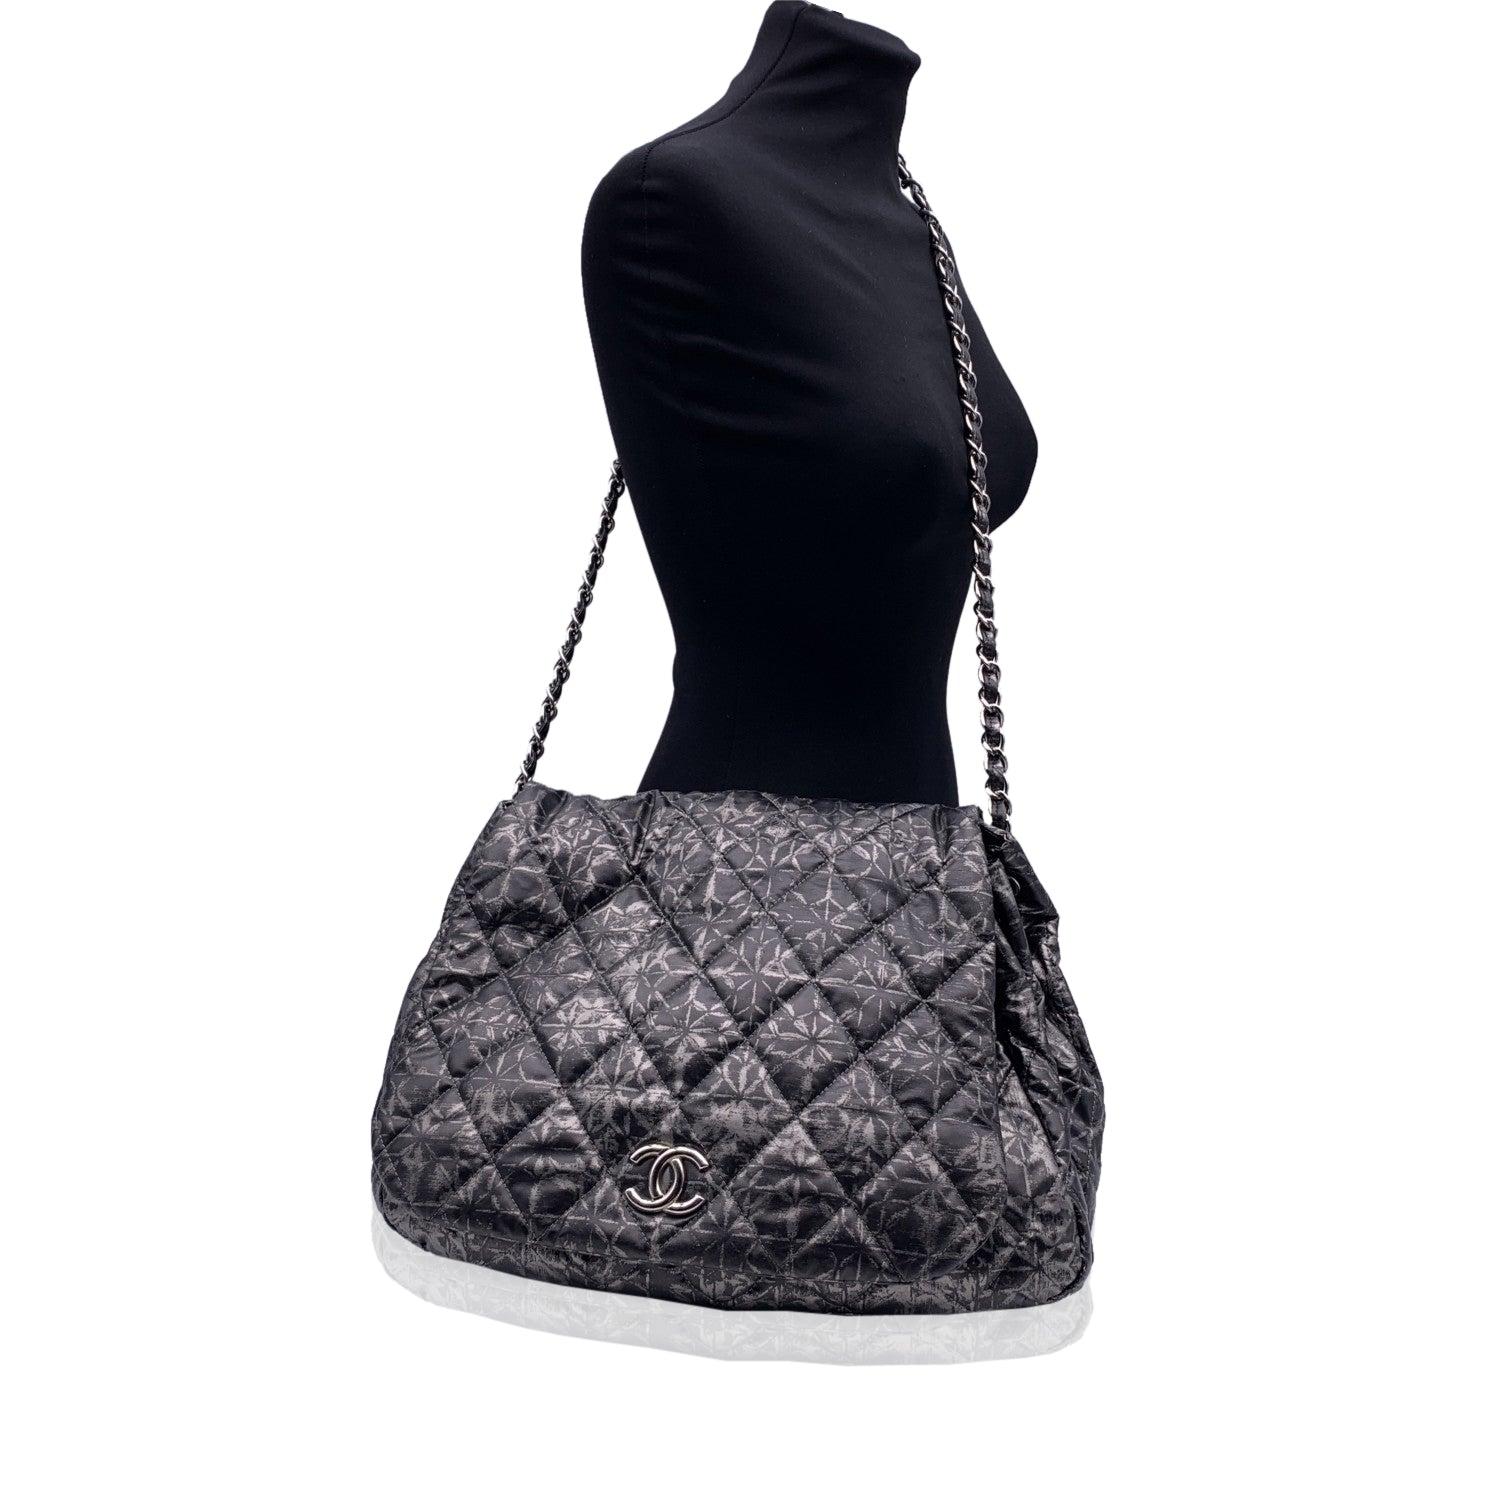 Chanel 'Rock in Moscow' Accordion Flap Bag crafted from metallic grey padded nylon in an abstract printed quilted pattern. Flap front with silver metal CC - CHANEL logo with internal magnetic button closure. Silver metal chain with interwoven nylon.